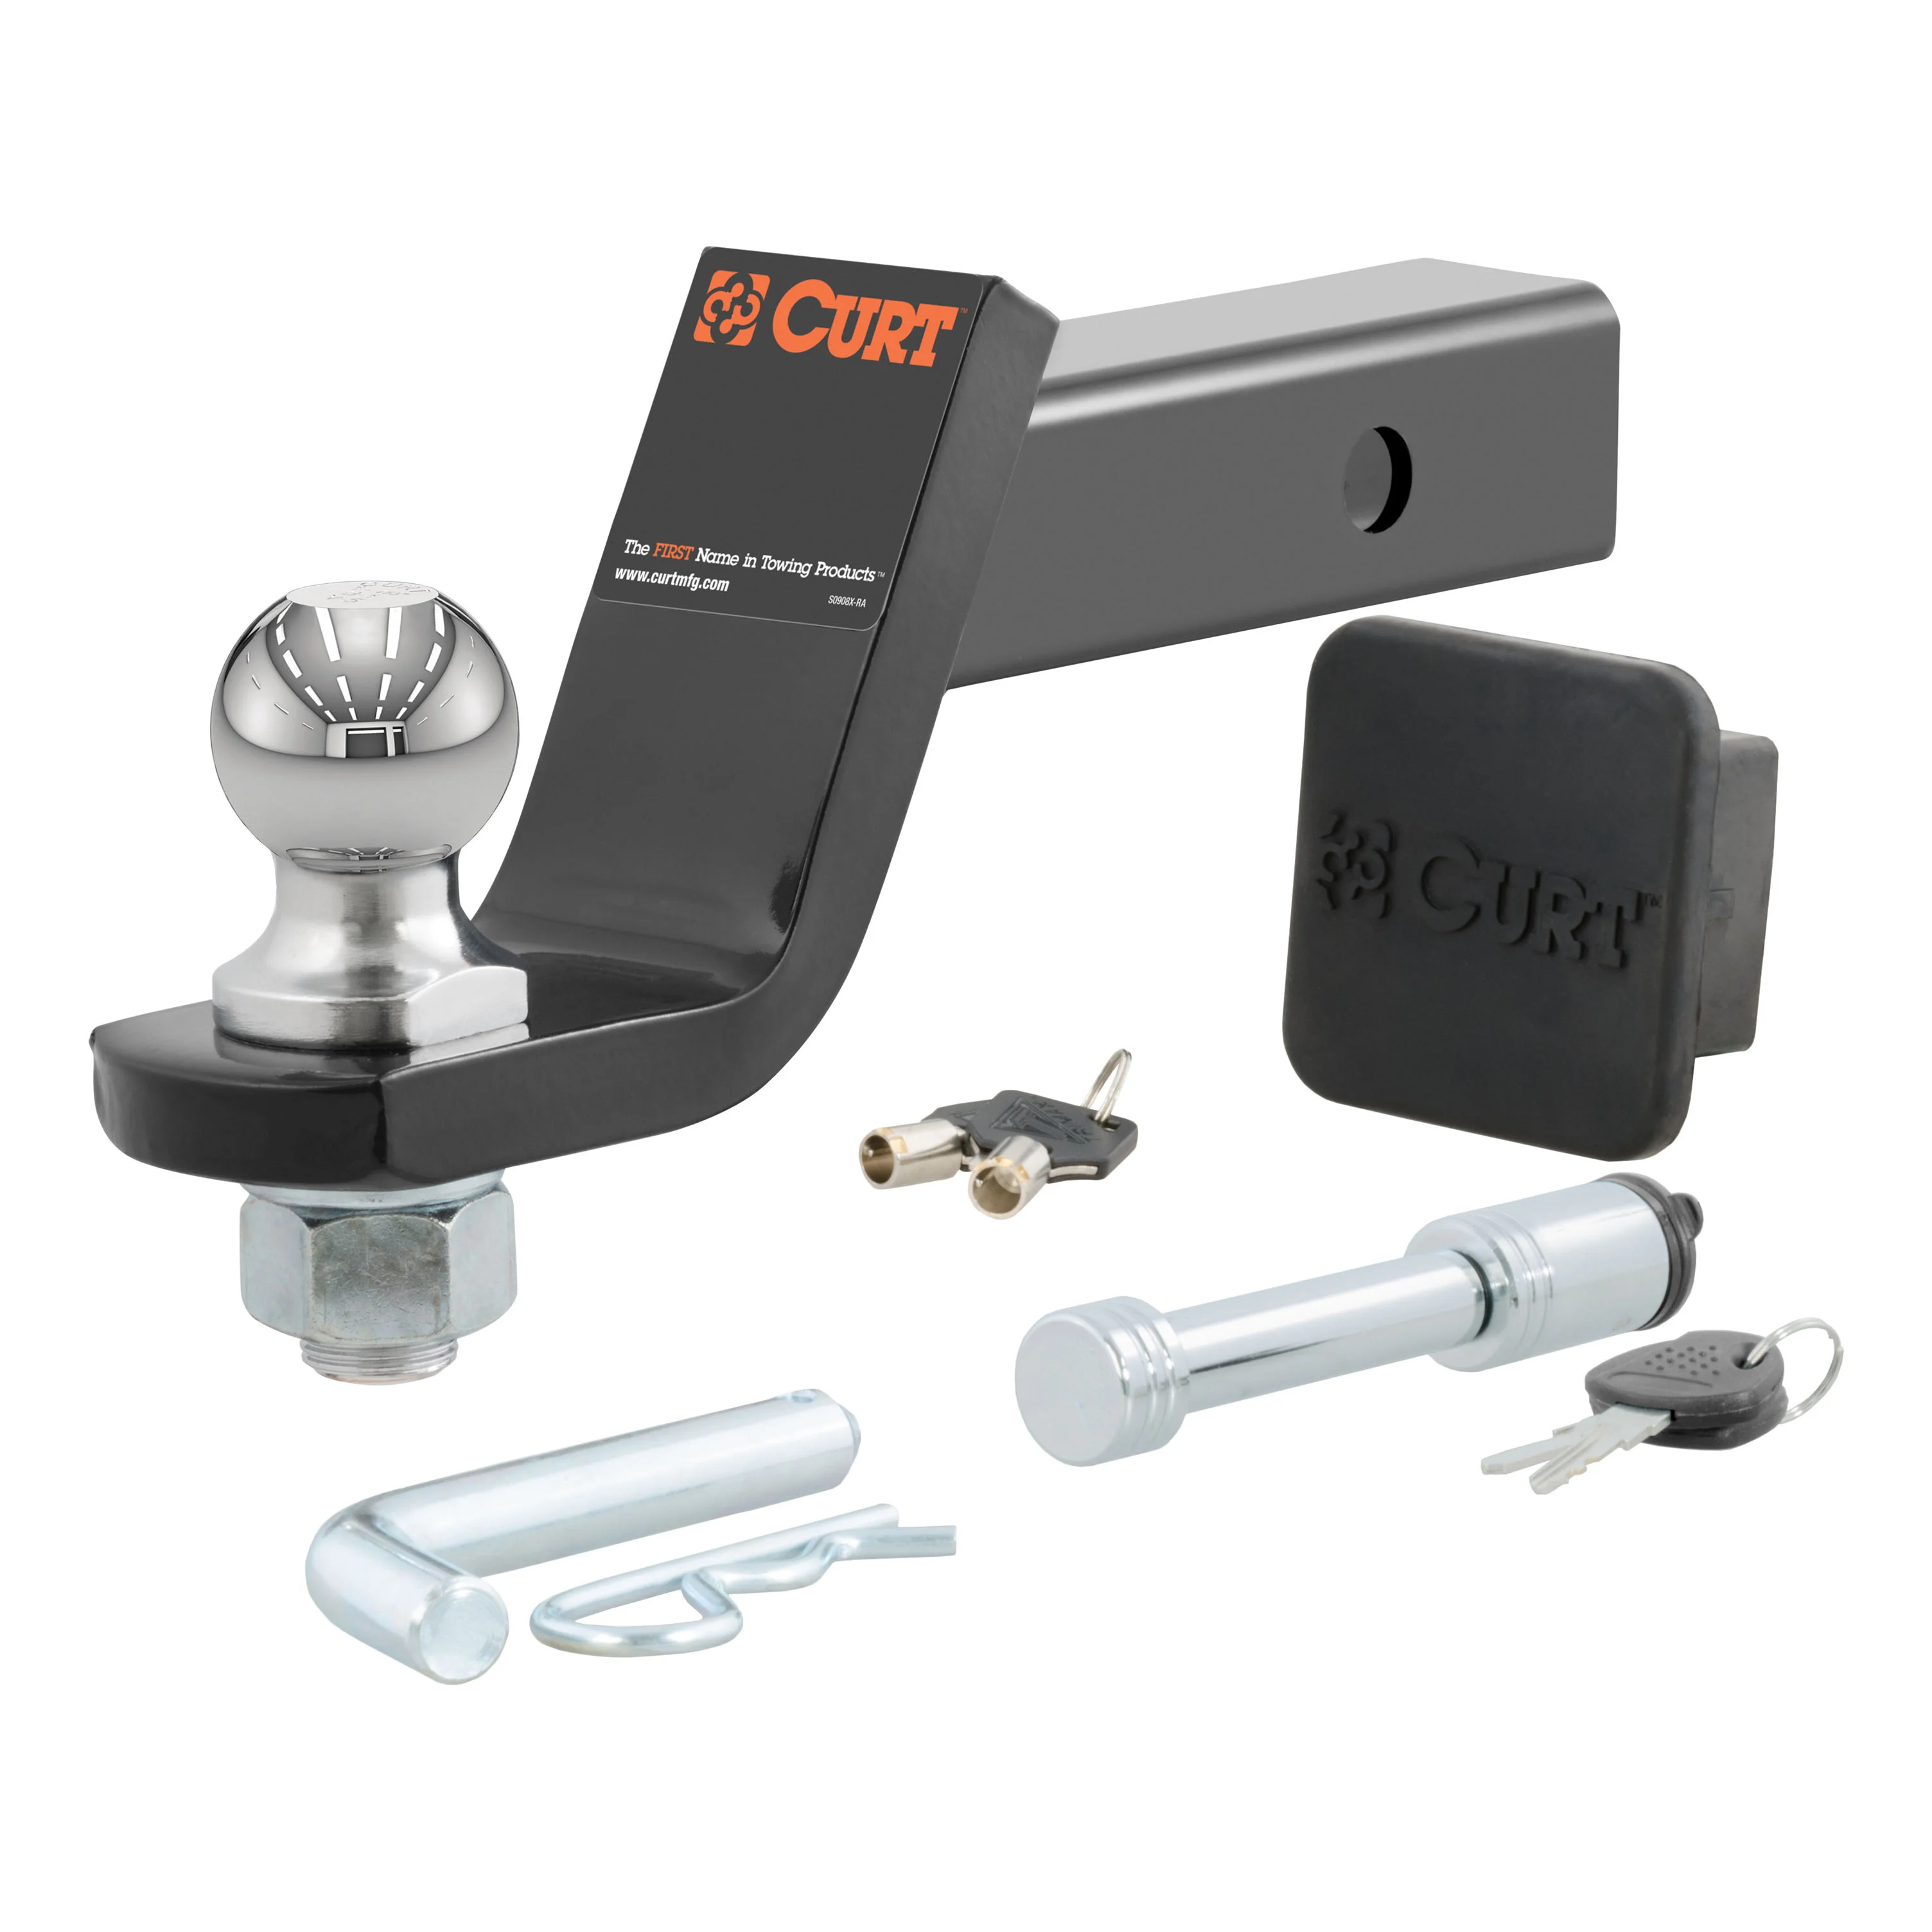 2019 Dodge Durango Curt Towing Starter Kit 2-inch ball, 2-inch shank with 4-inch drop 68628506AA